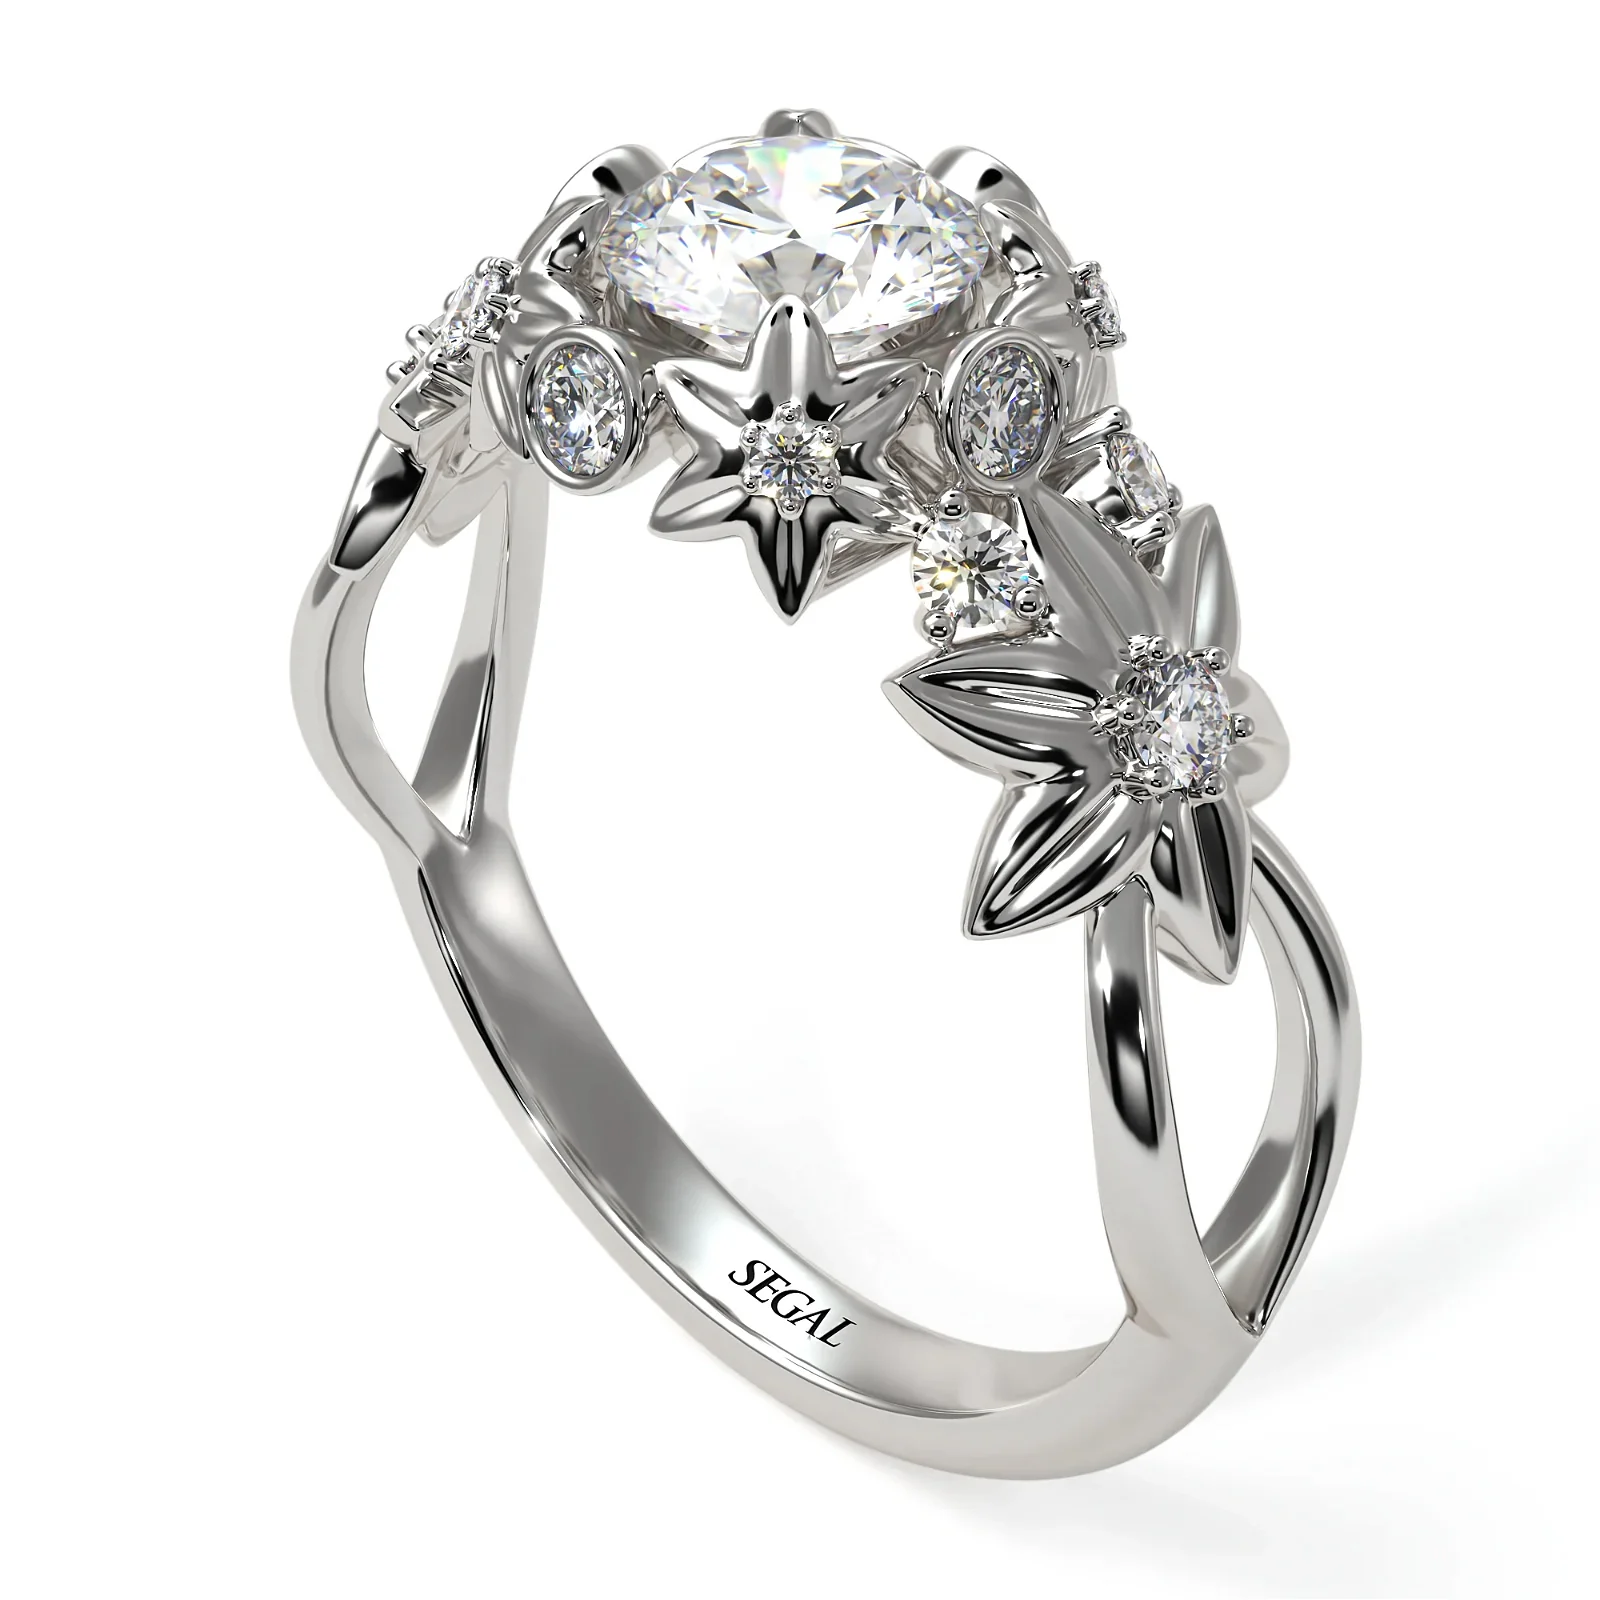 Image of Flowers And Branches Diamond Ring - Katherine no. 3